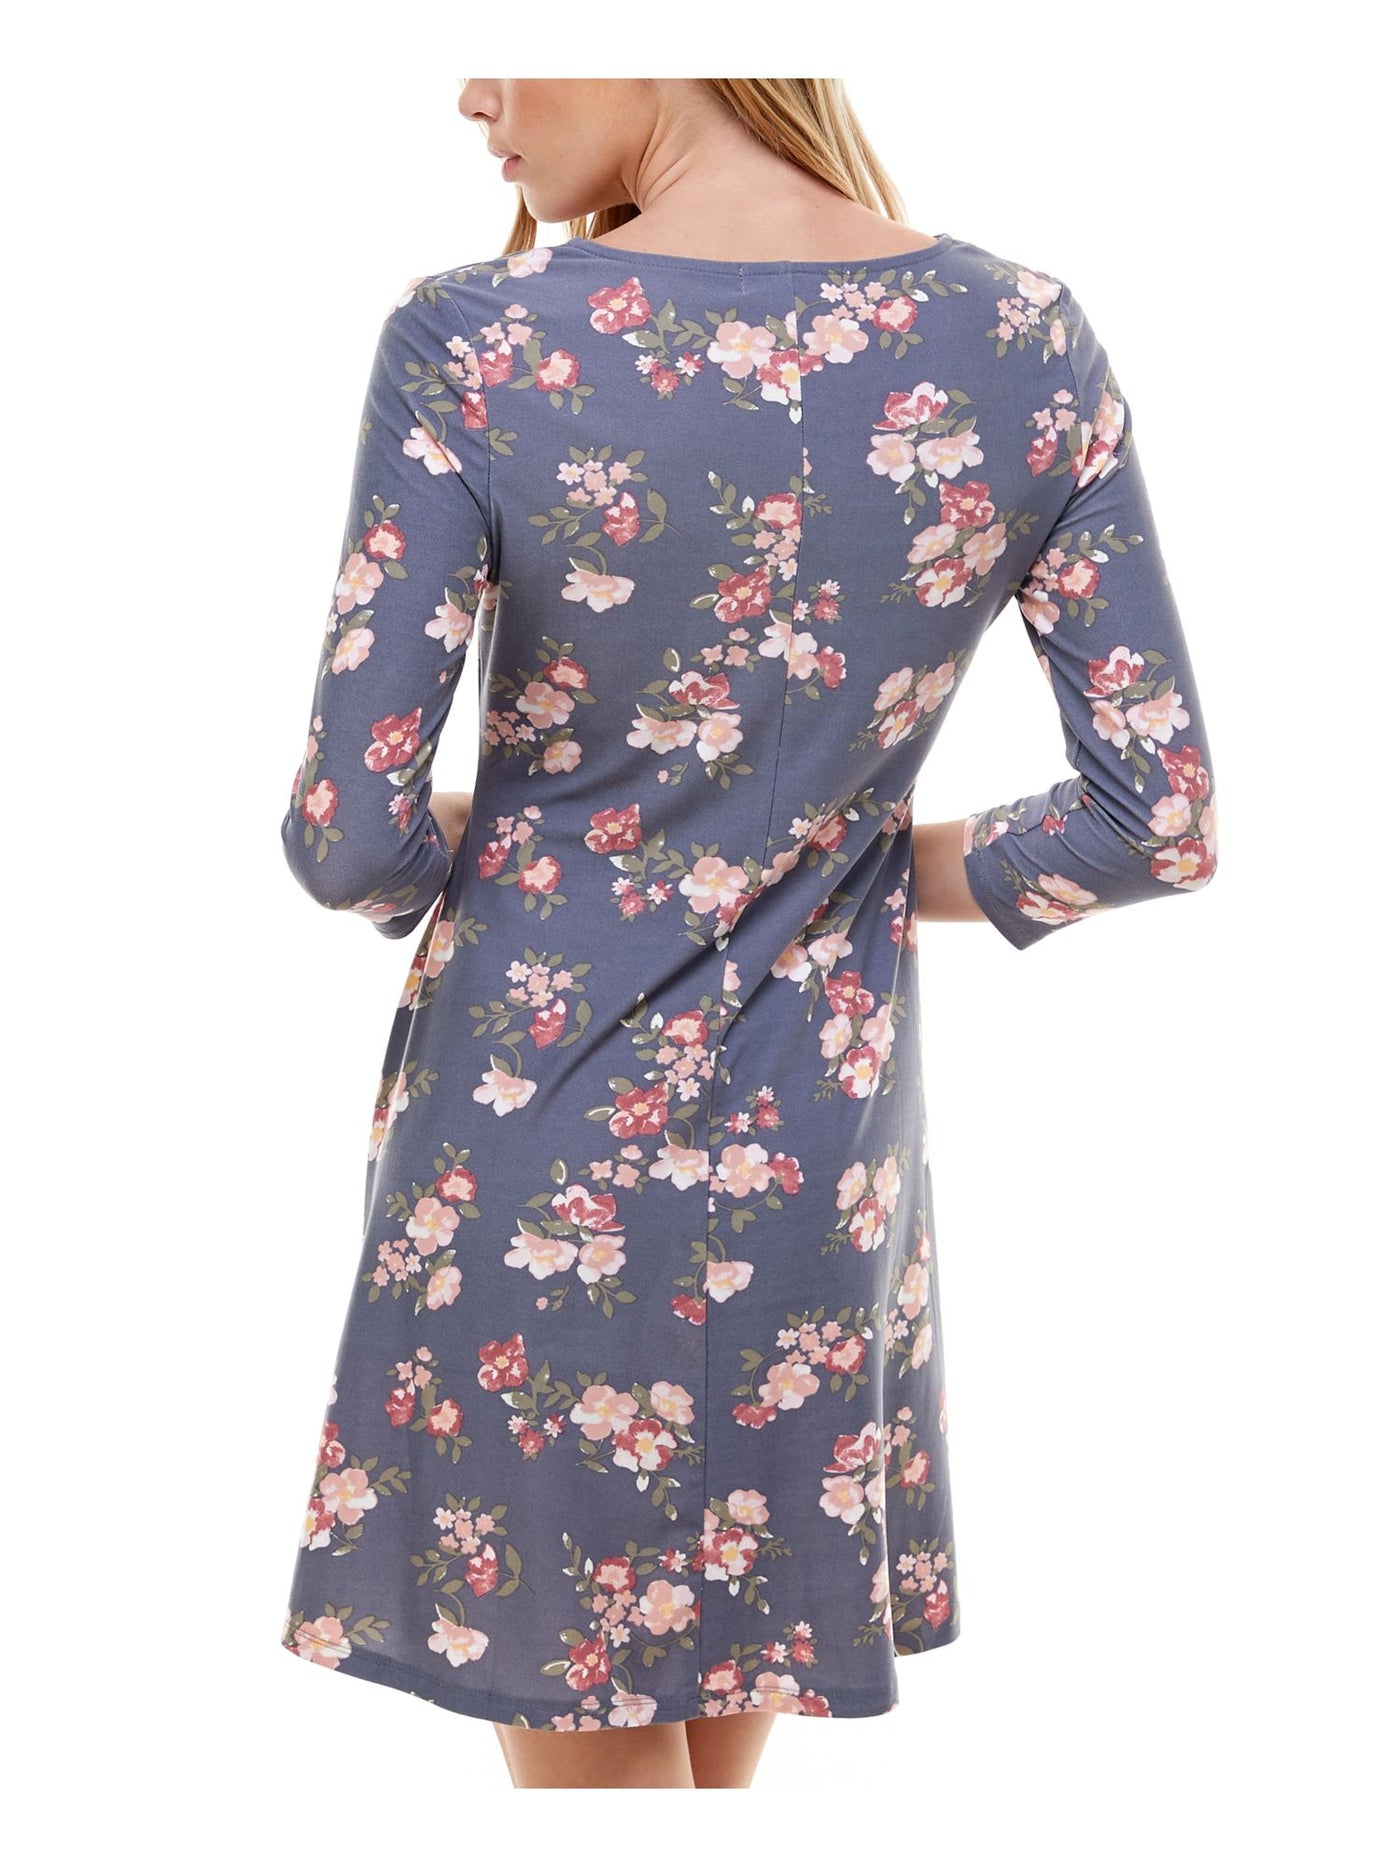 PLANET GOLD Womens Gray Cage Detail Floral 3/4 Sleeve V Neck Knee Length A-Line Dress Juniors XS